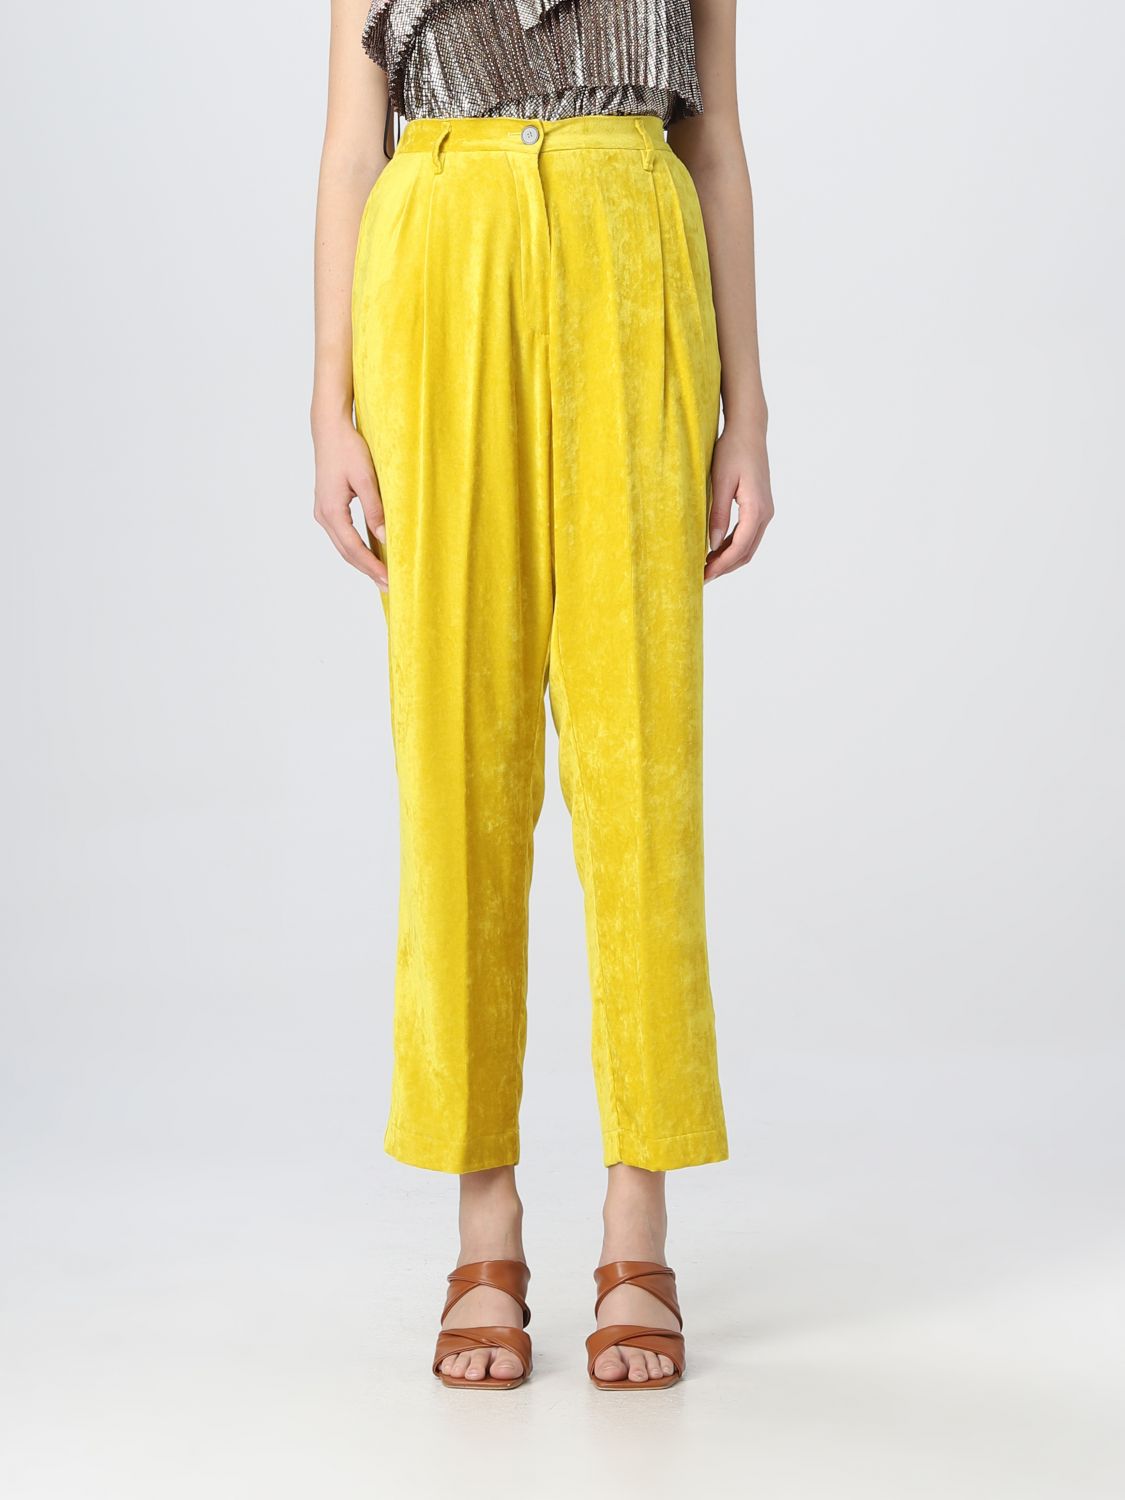 FORTE FORTE: pants for woman - Yellow | Forte Forte pants 9351 online ...